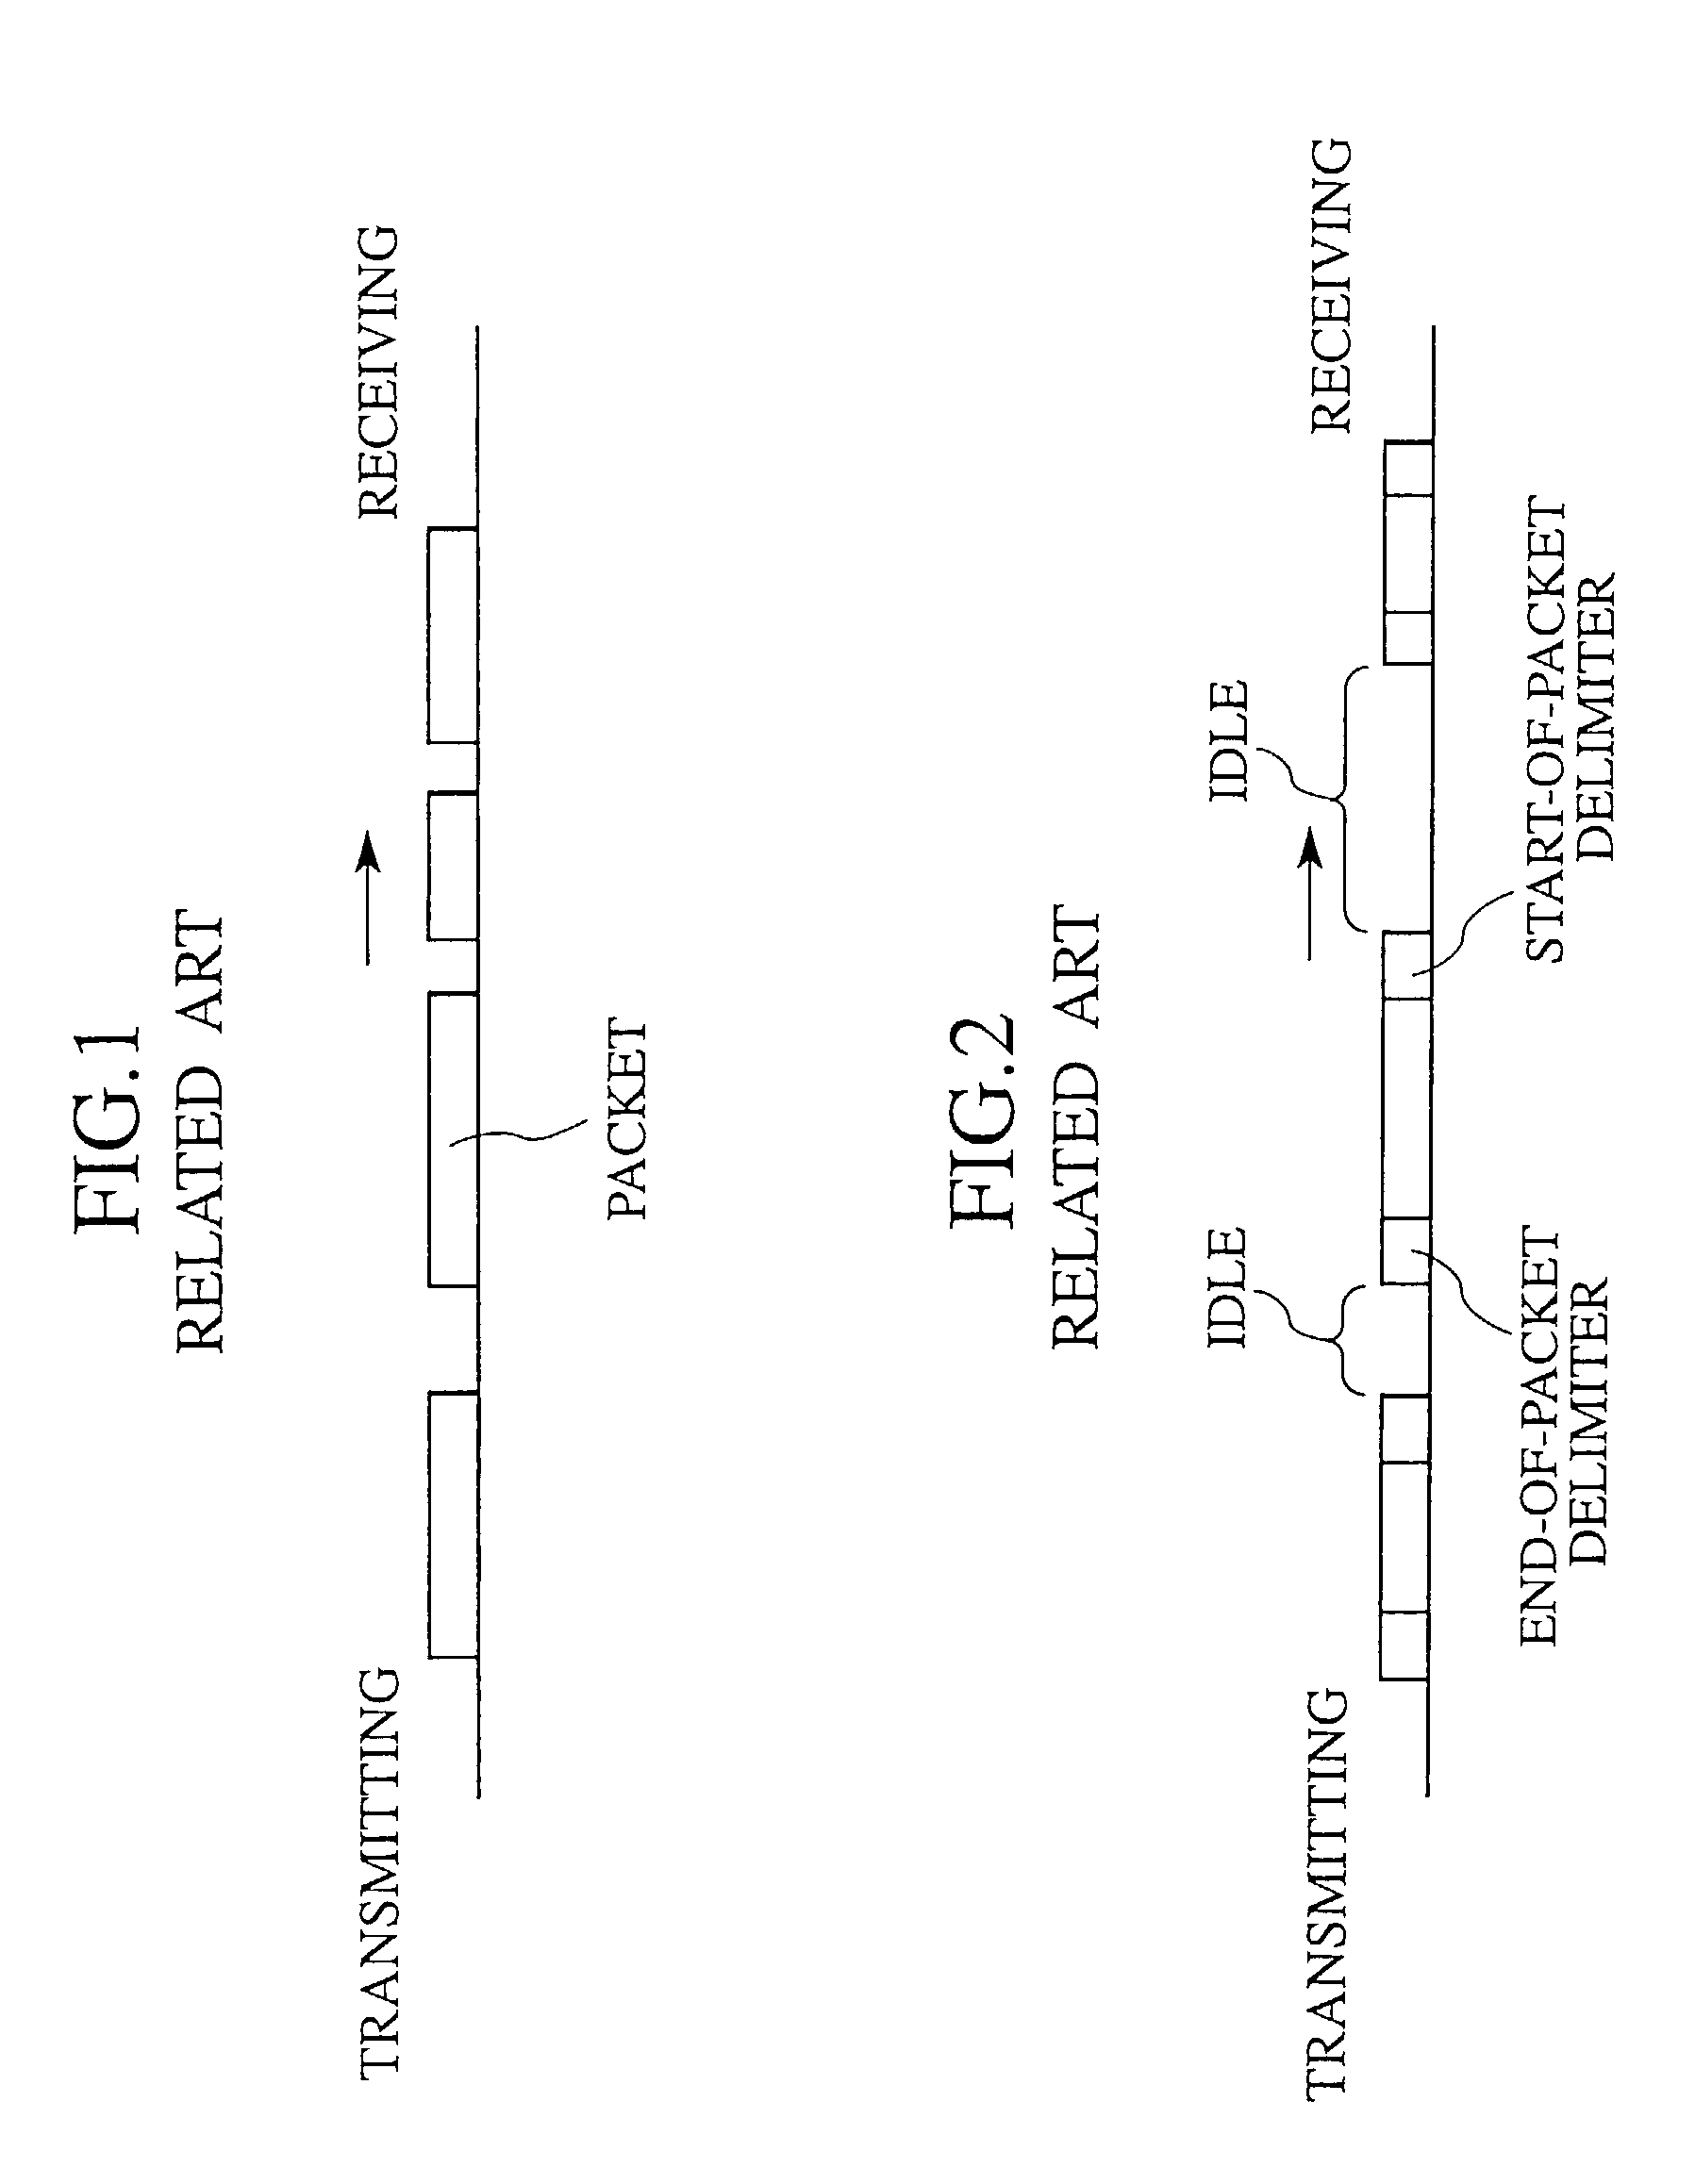 Packet control system and communication method